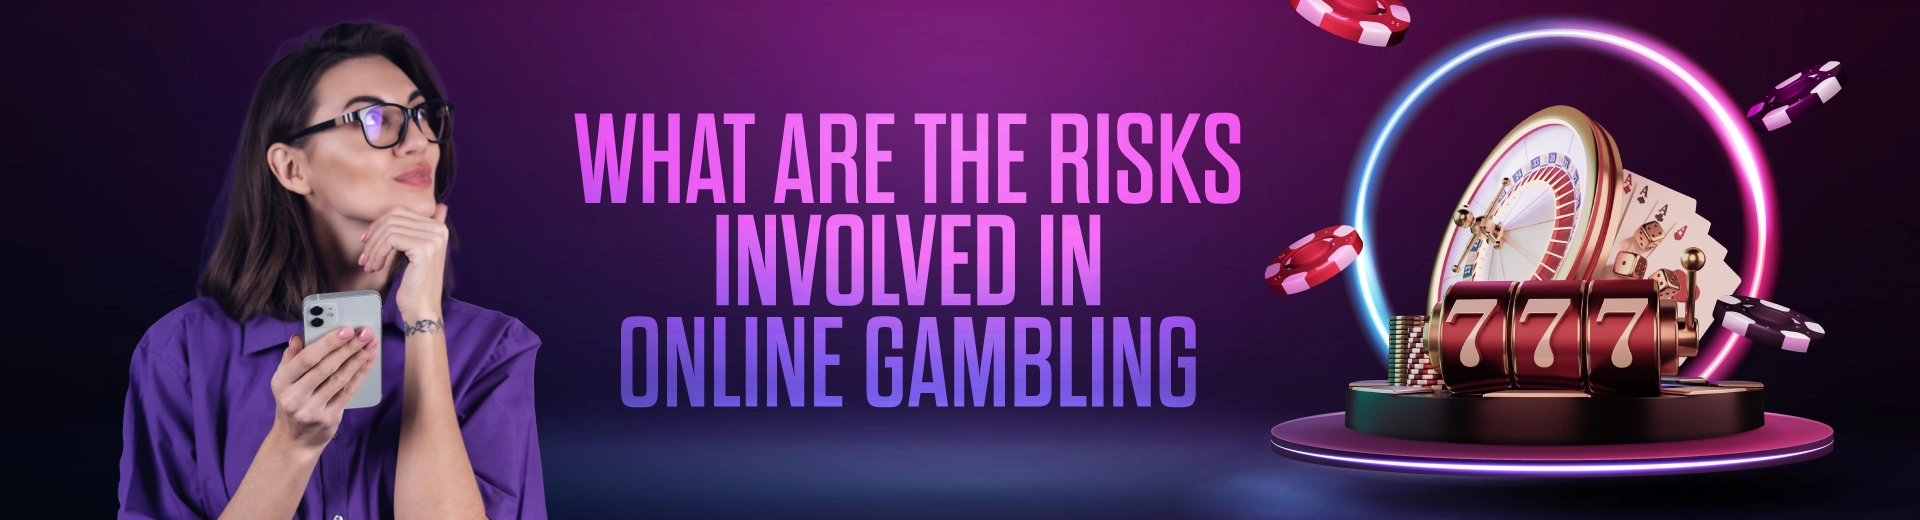 What Are the Risks in Online Gambling?